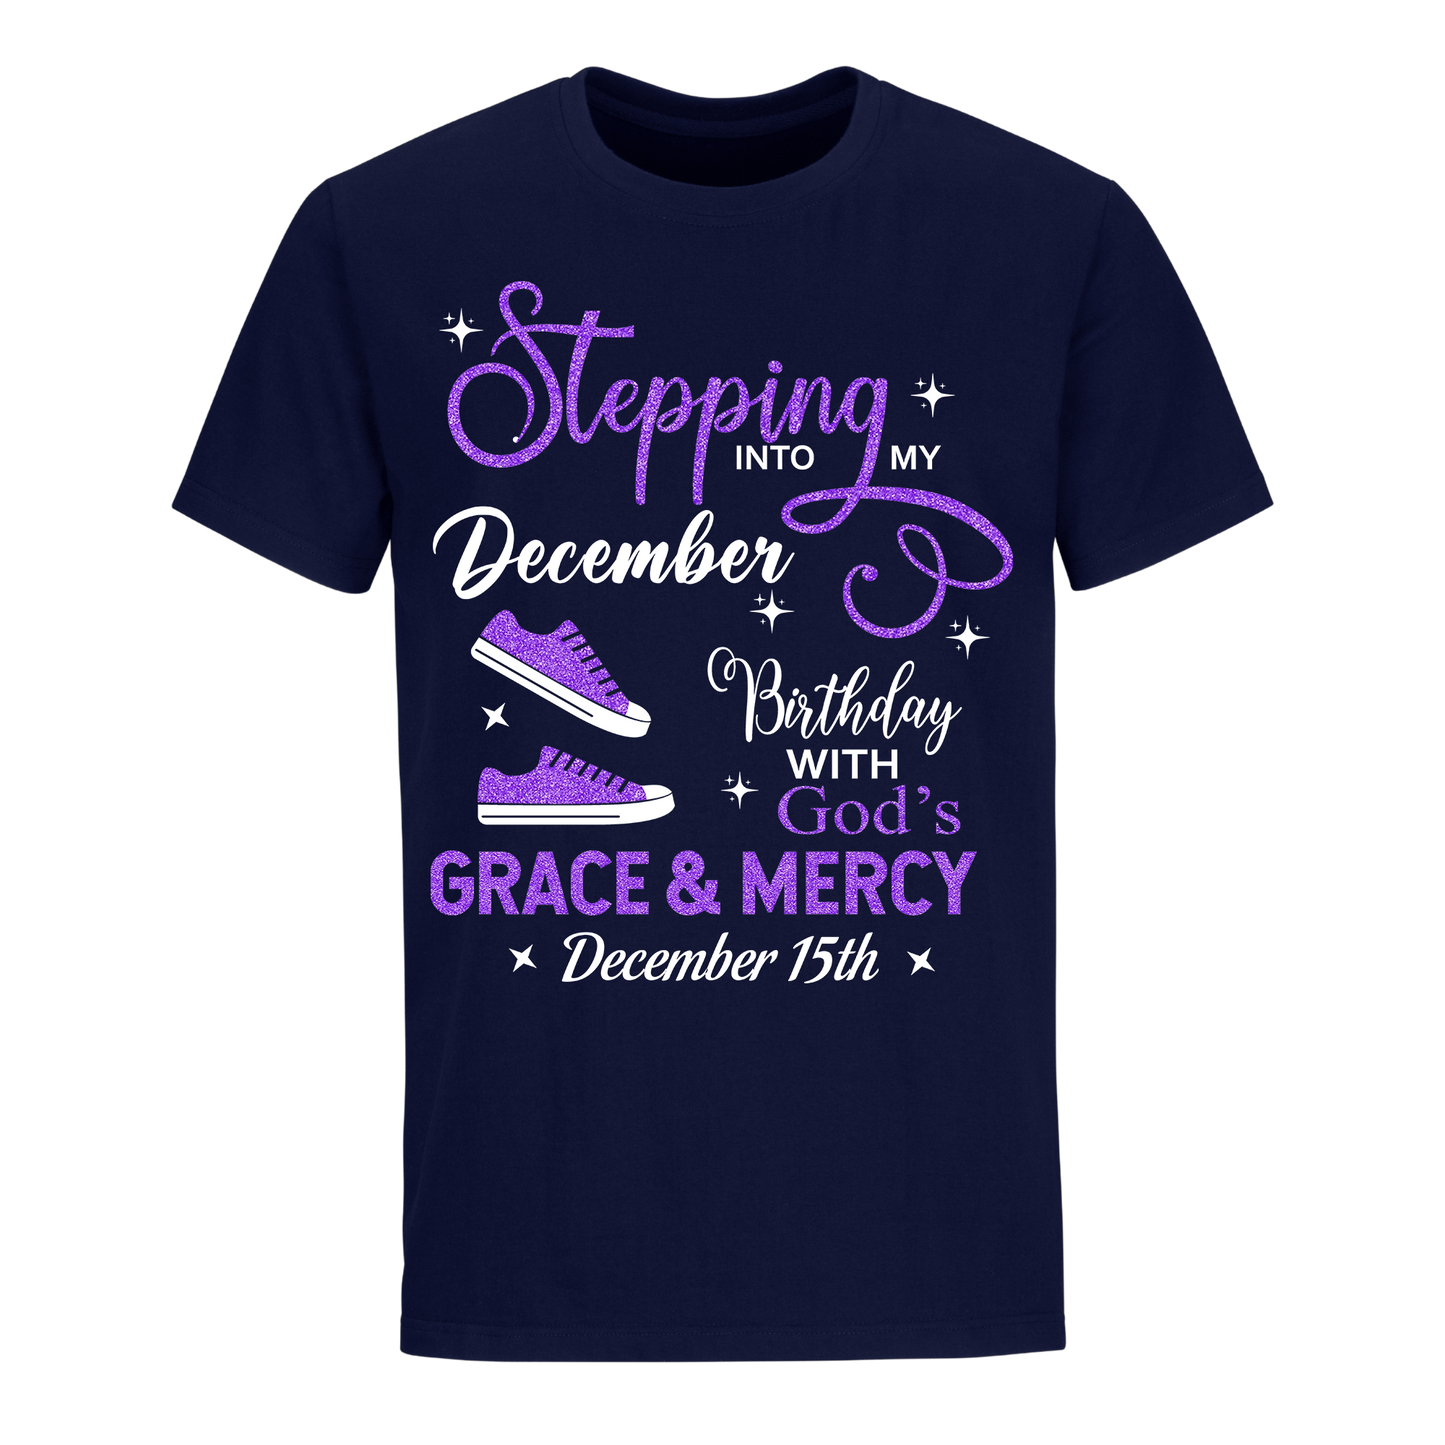 DECEMBER 15 GRACE AND MERCY